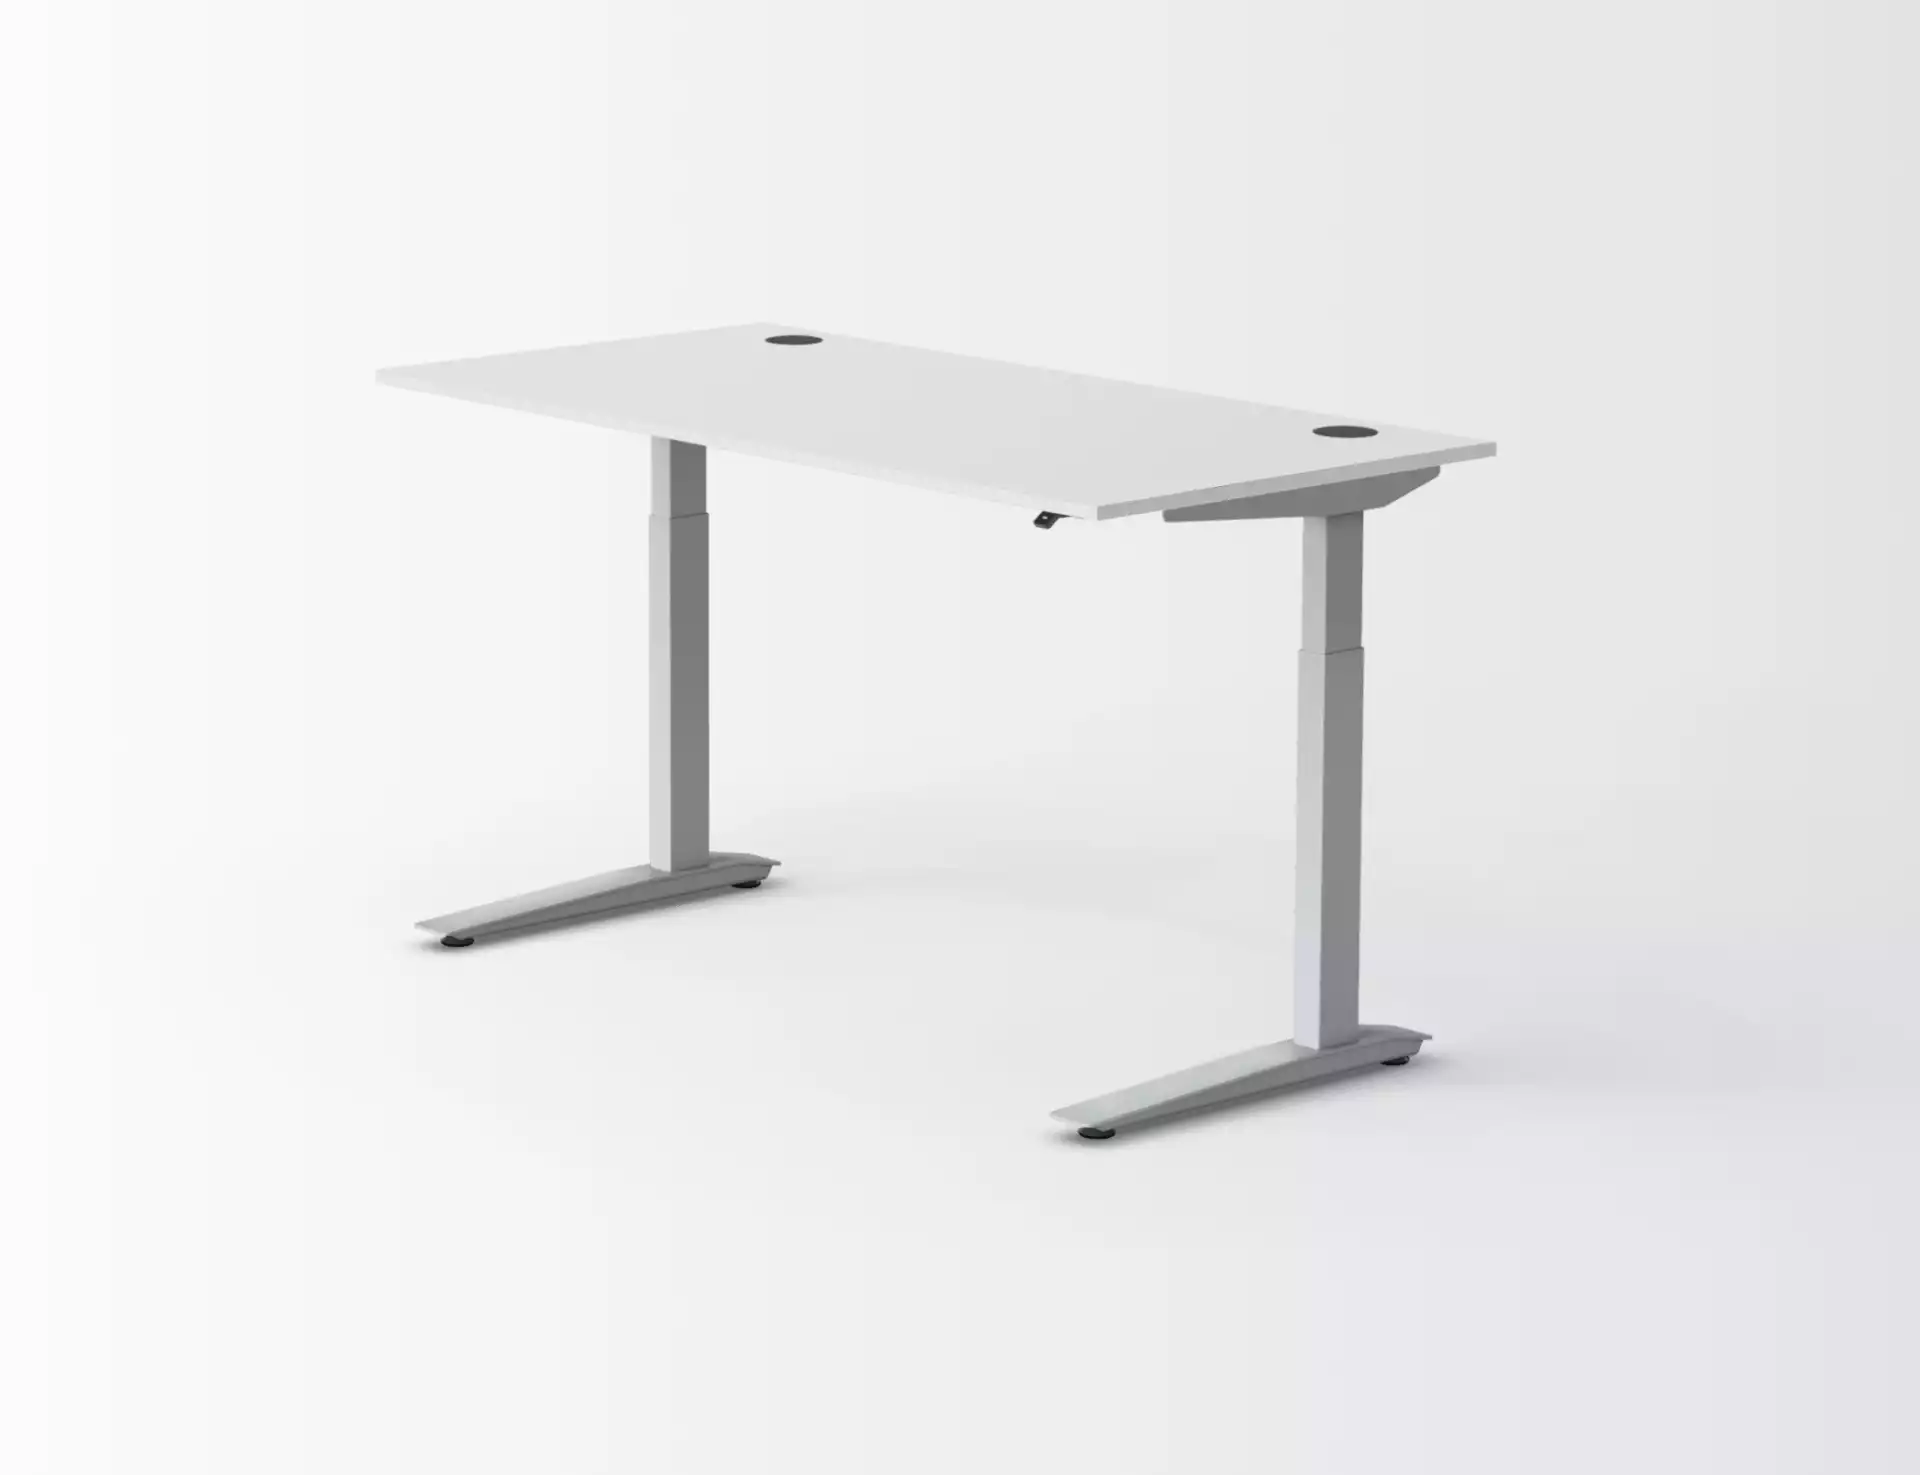 LeanRite Review: Why You MUST Get this Hybrid Standing Desk Chair 2